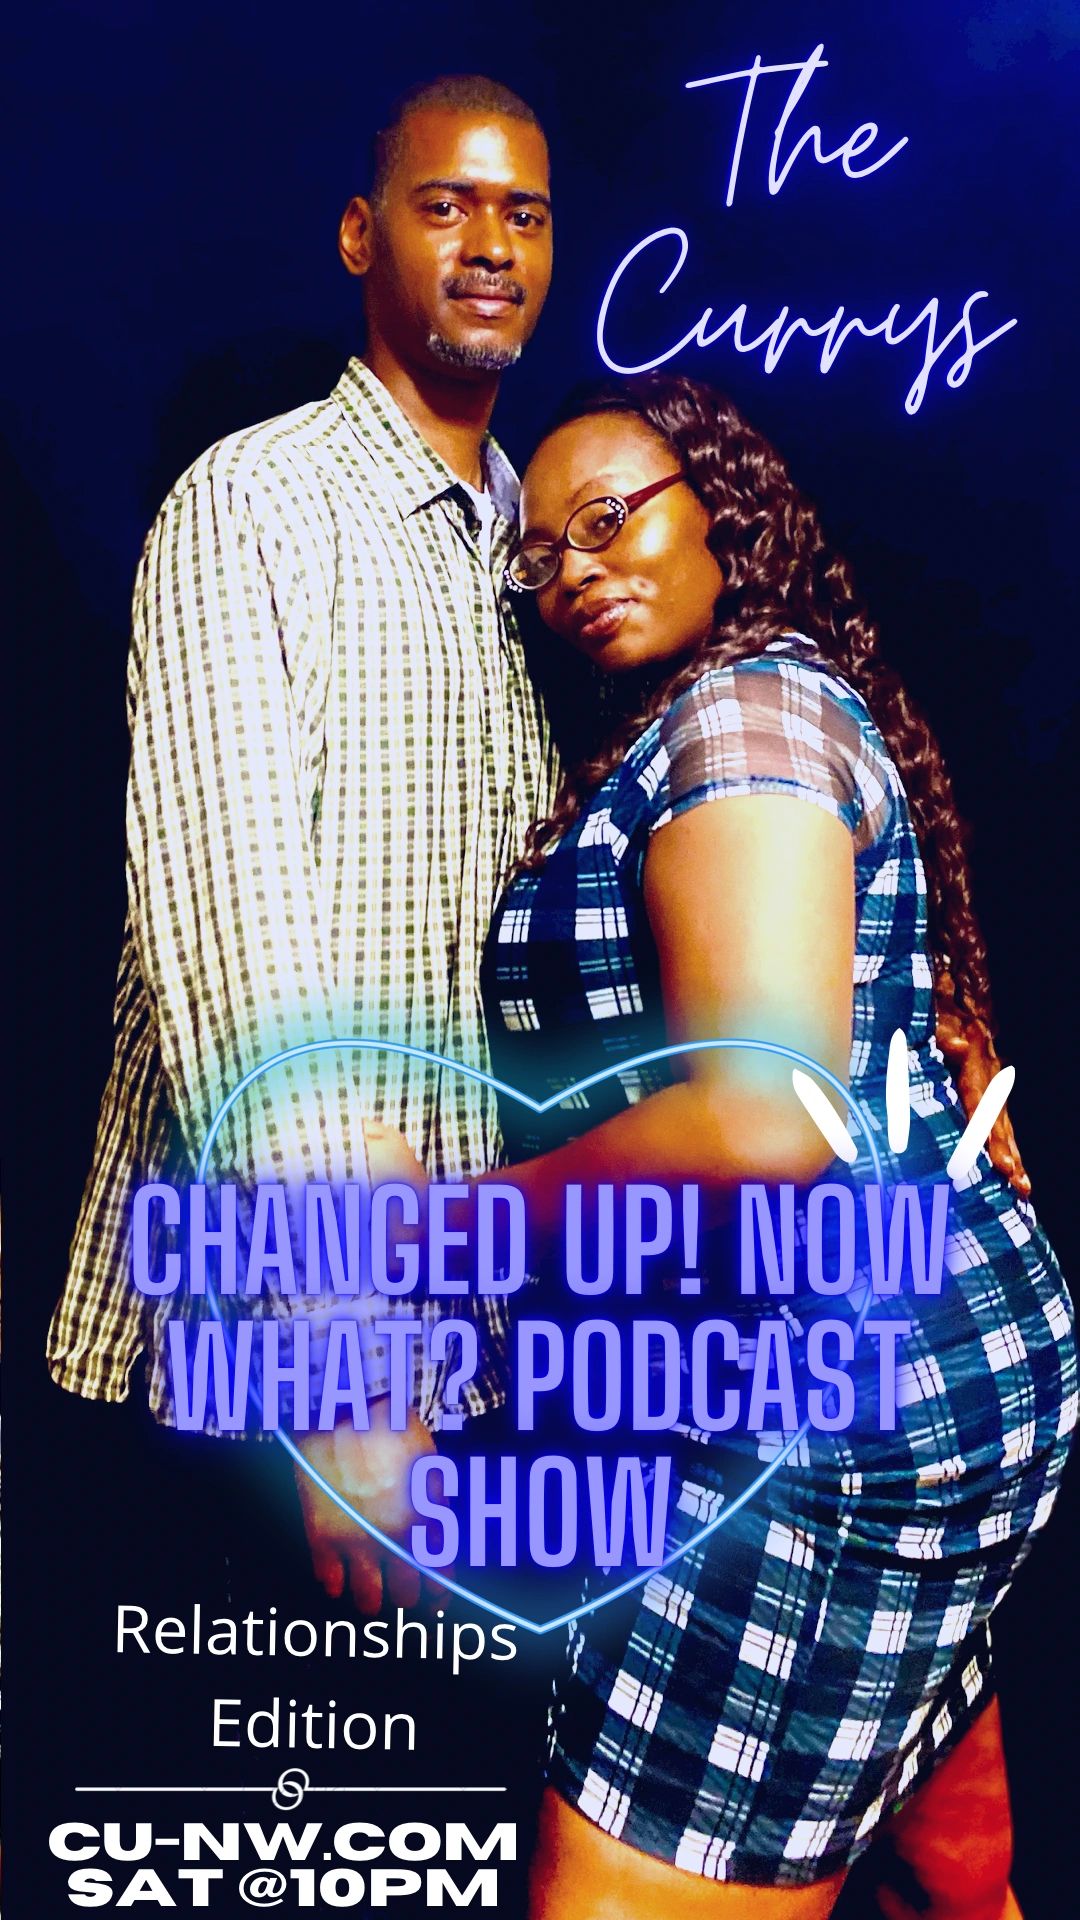 Married couple, podcast show, relationships